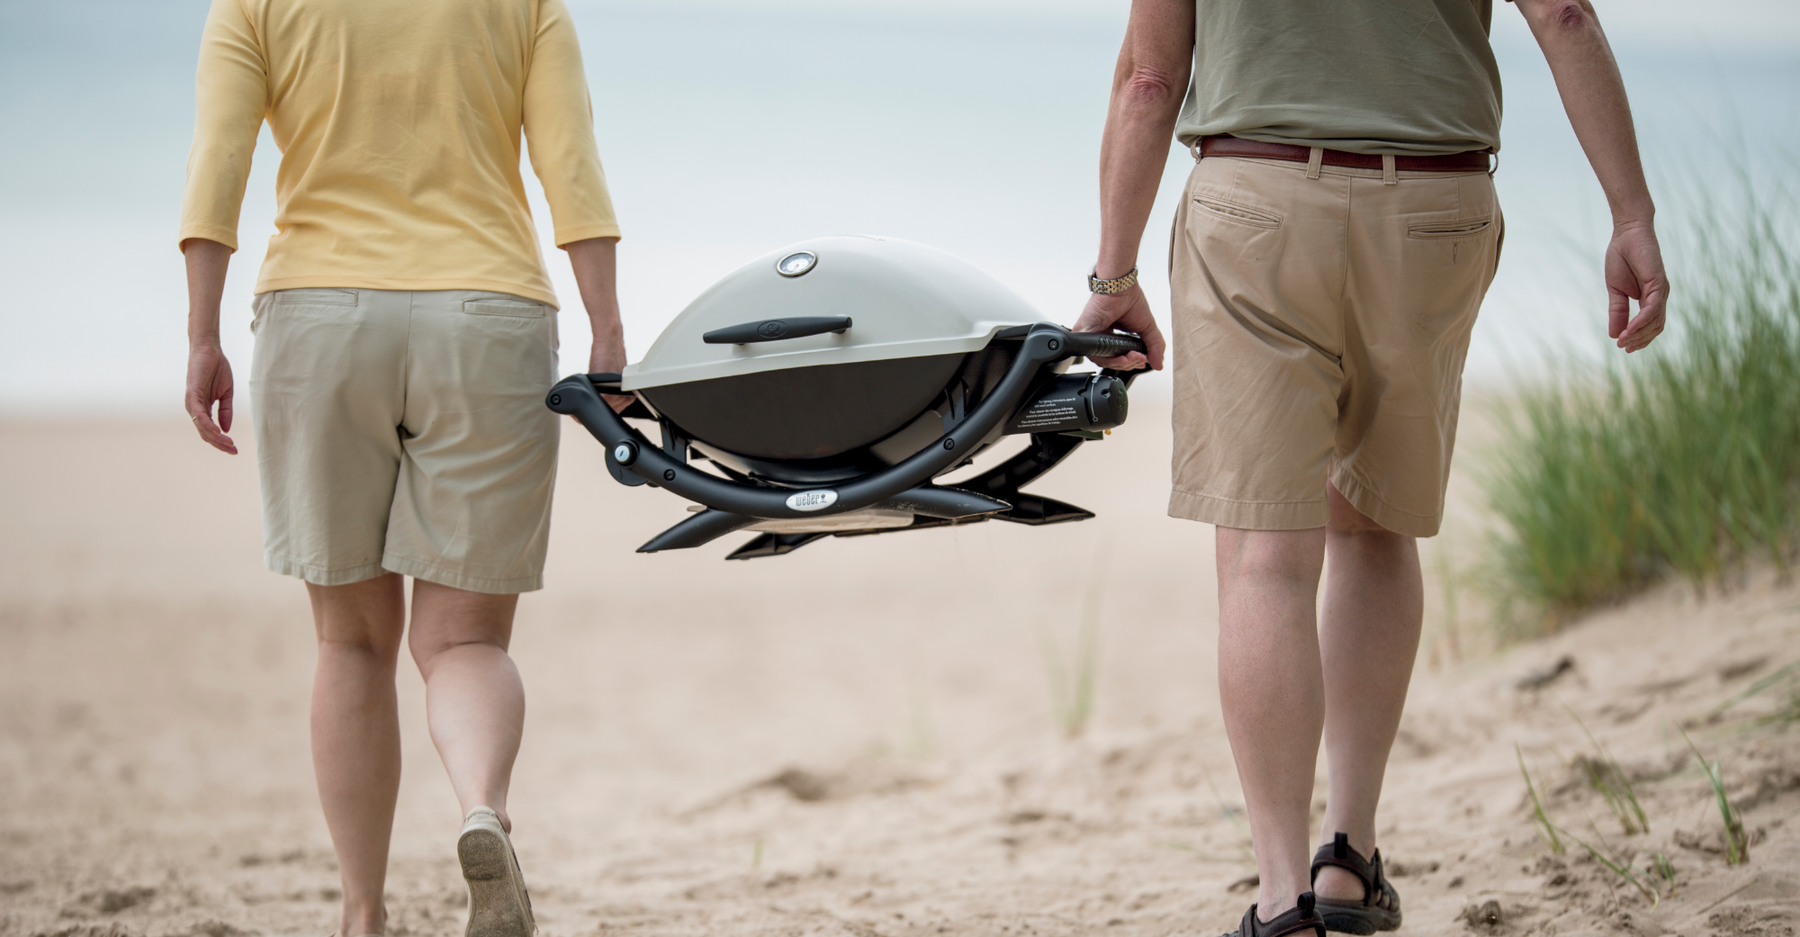 Couple carrying a Weber Q 2200 Propane Portable Grill